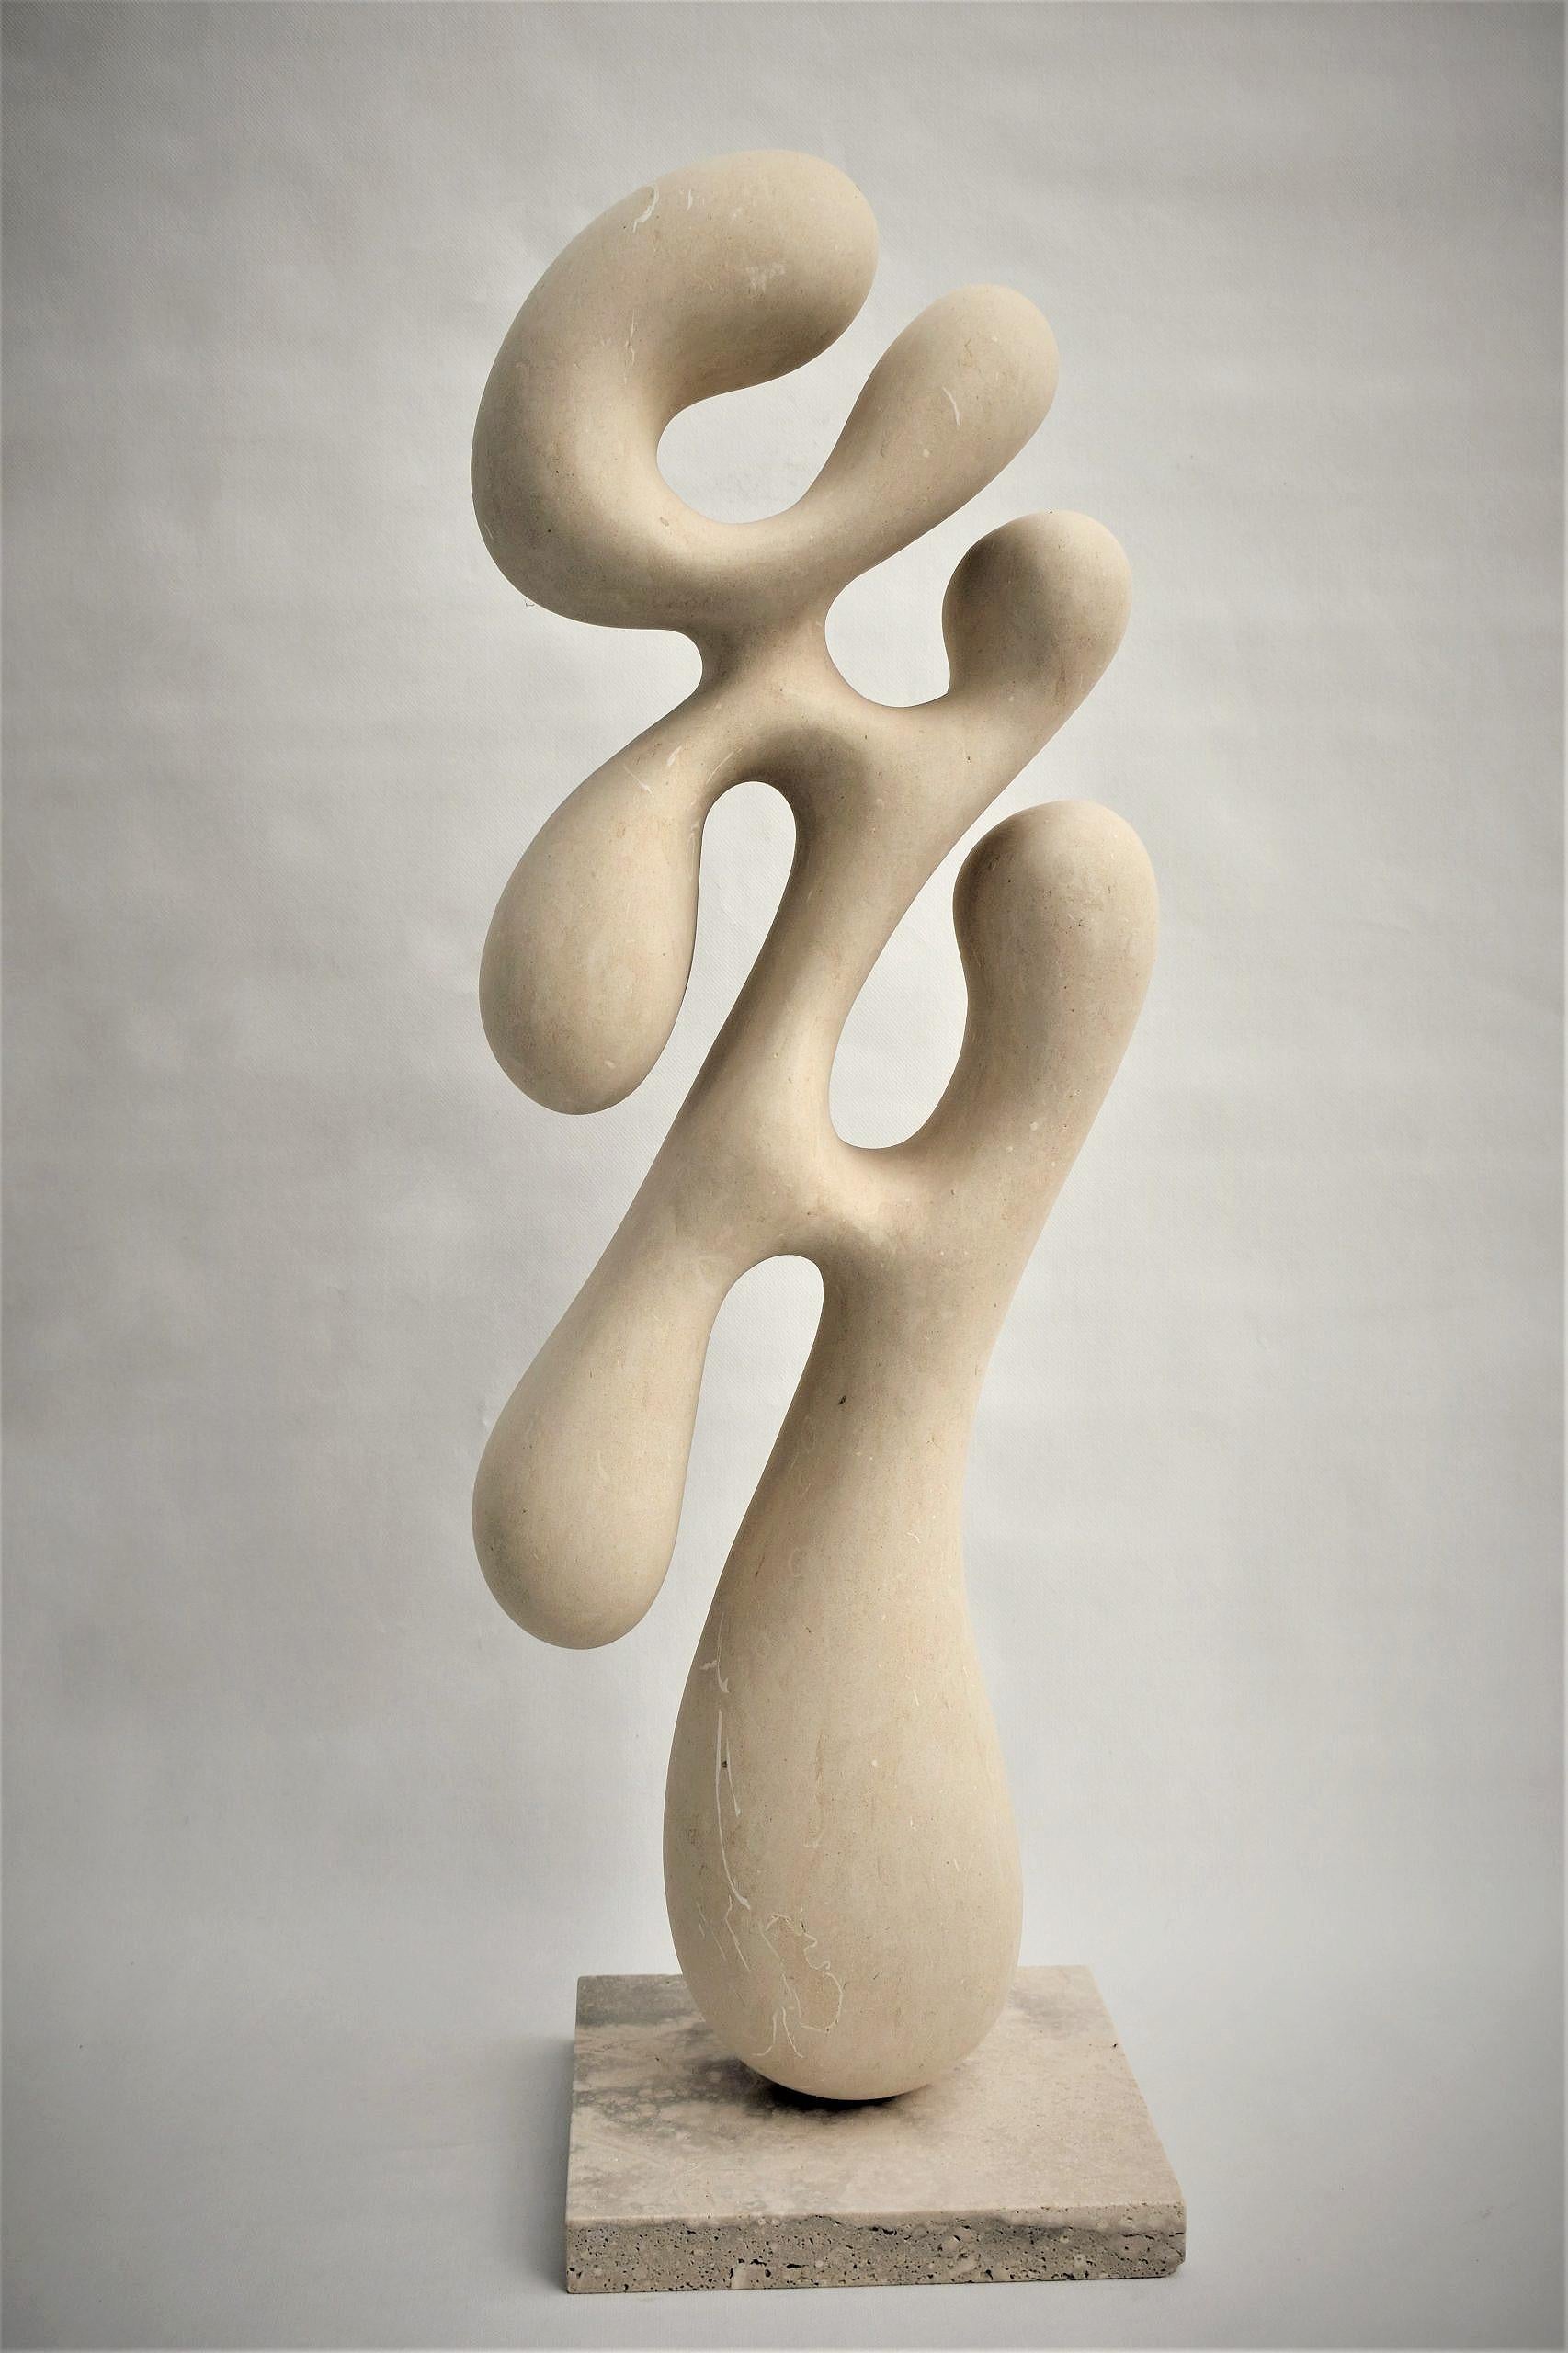 21st century abstract sculpture BLOG by Renzo Buttazzo from Italy

Sculpture in Lecce Stone
Delivered with a certificate of authenticity.

Since 1886 Renzo Buttazzo work with Pietra Leccese (limestone from Lecce), and during this time he